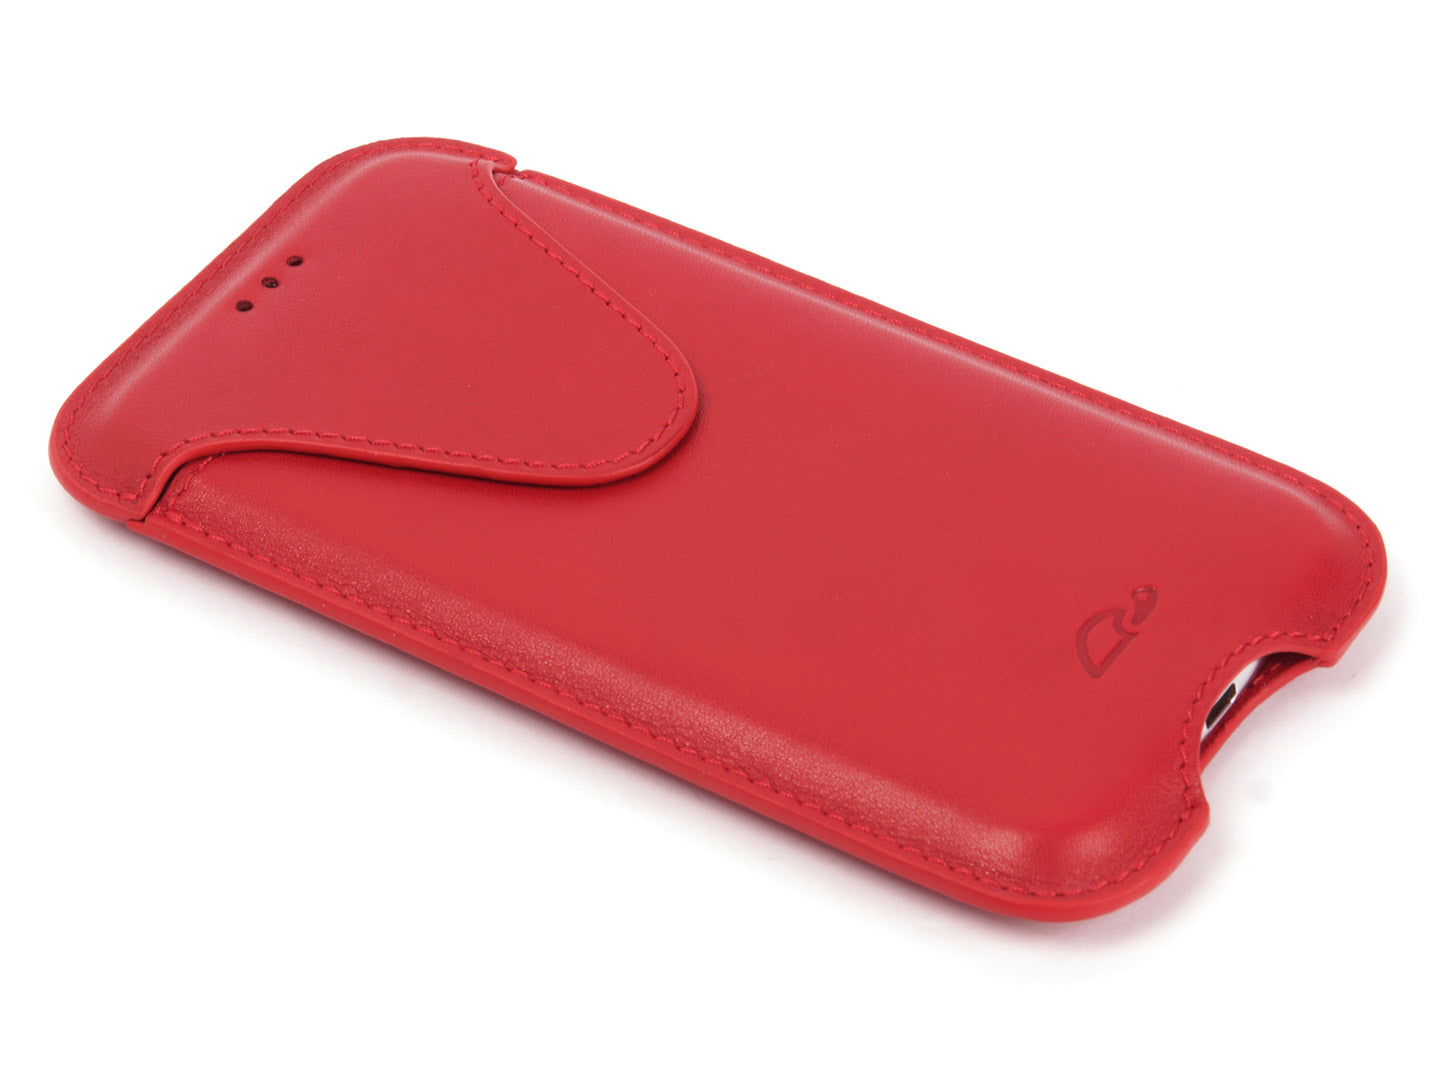 Leather pouch iPhone X / Xs / 11 Pro - Red Leather Cover - Sleeve Case - front - Carapaz